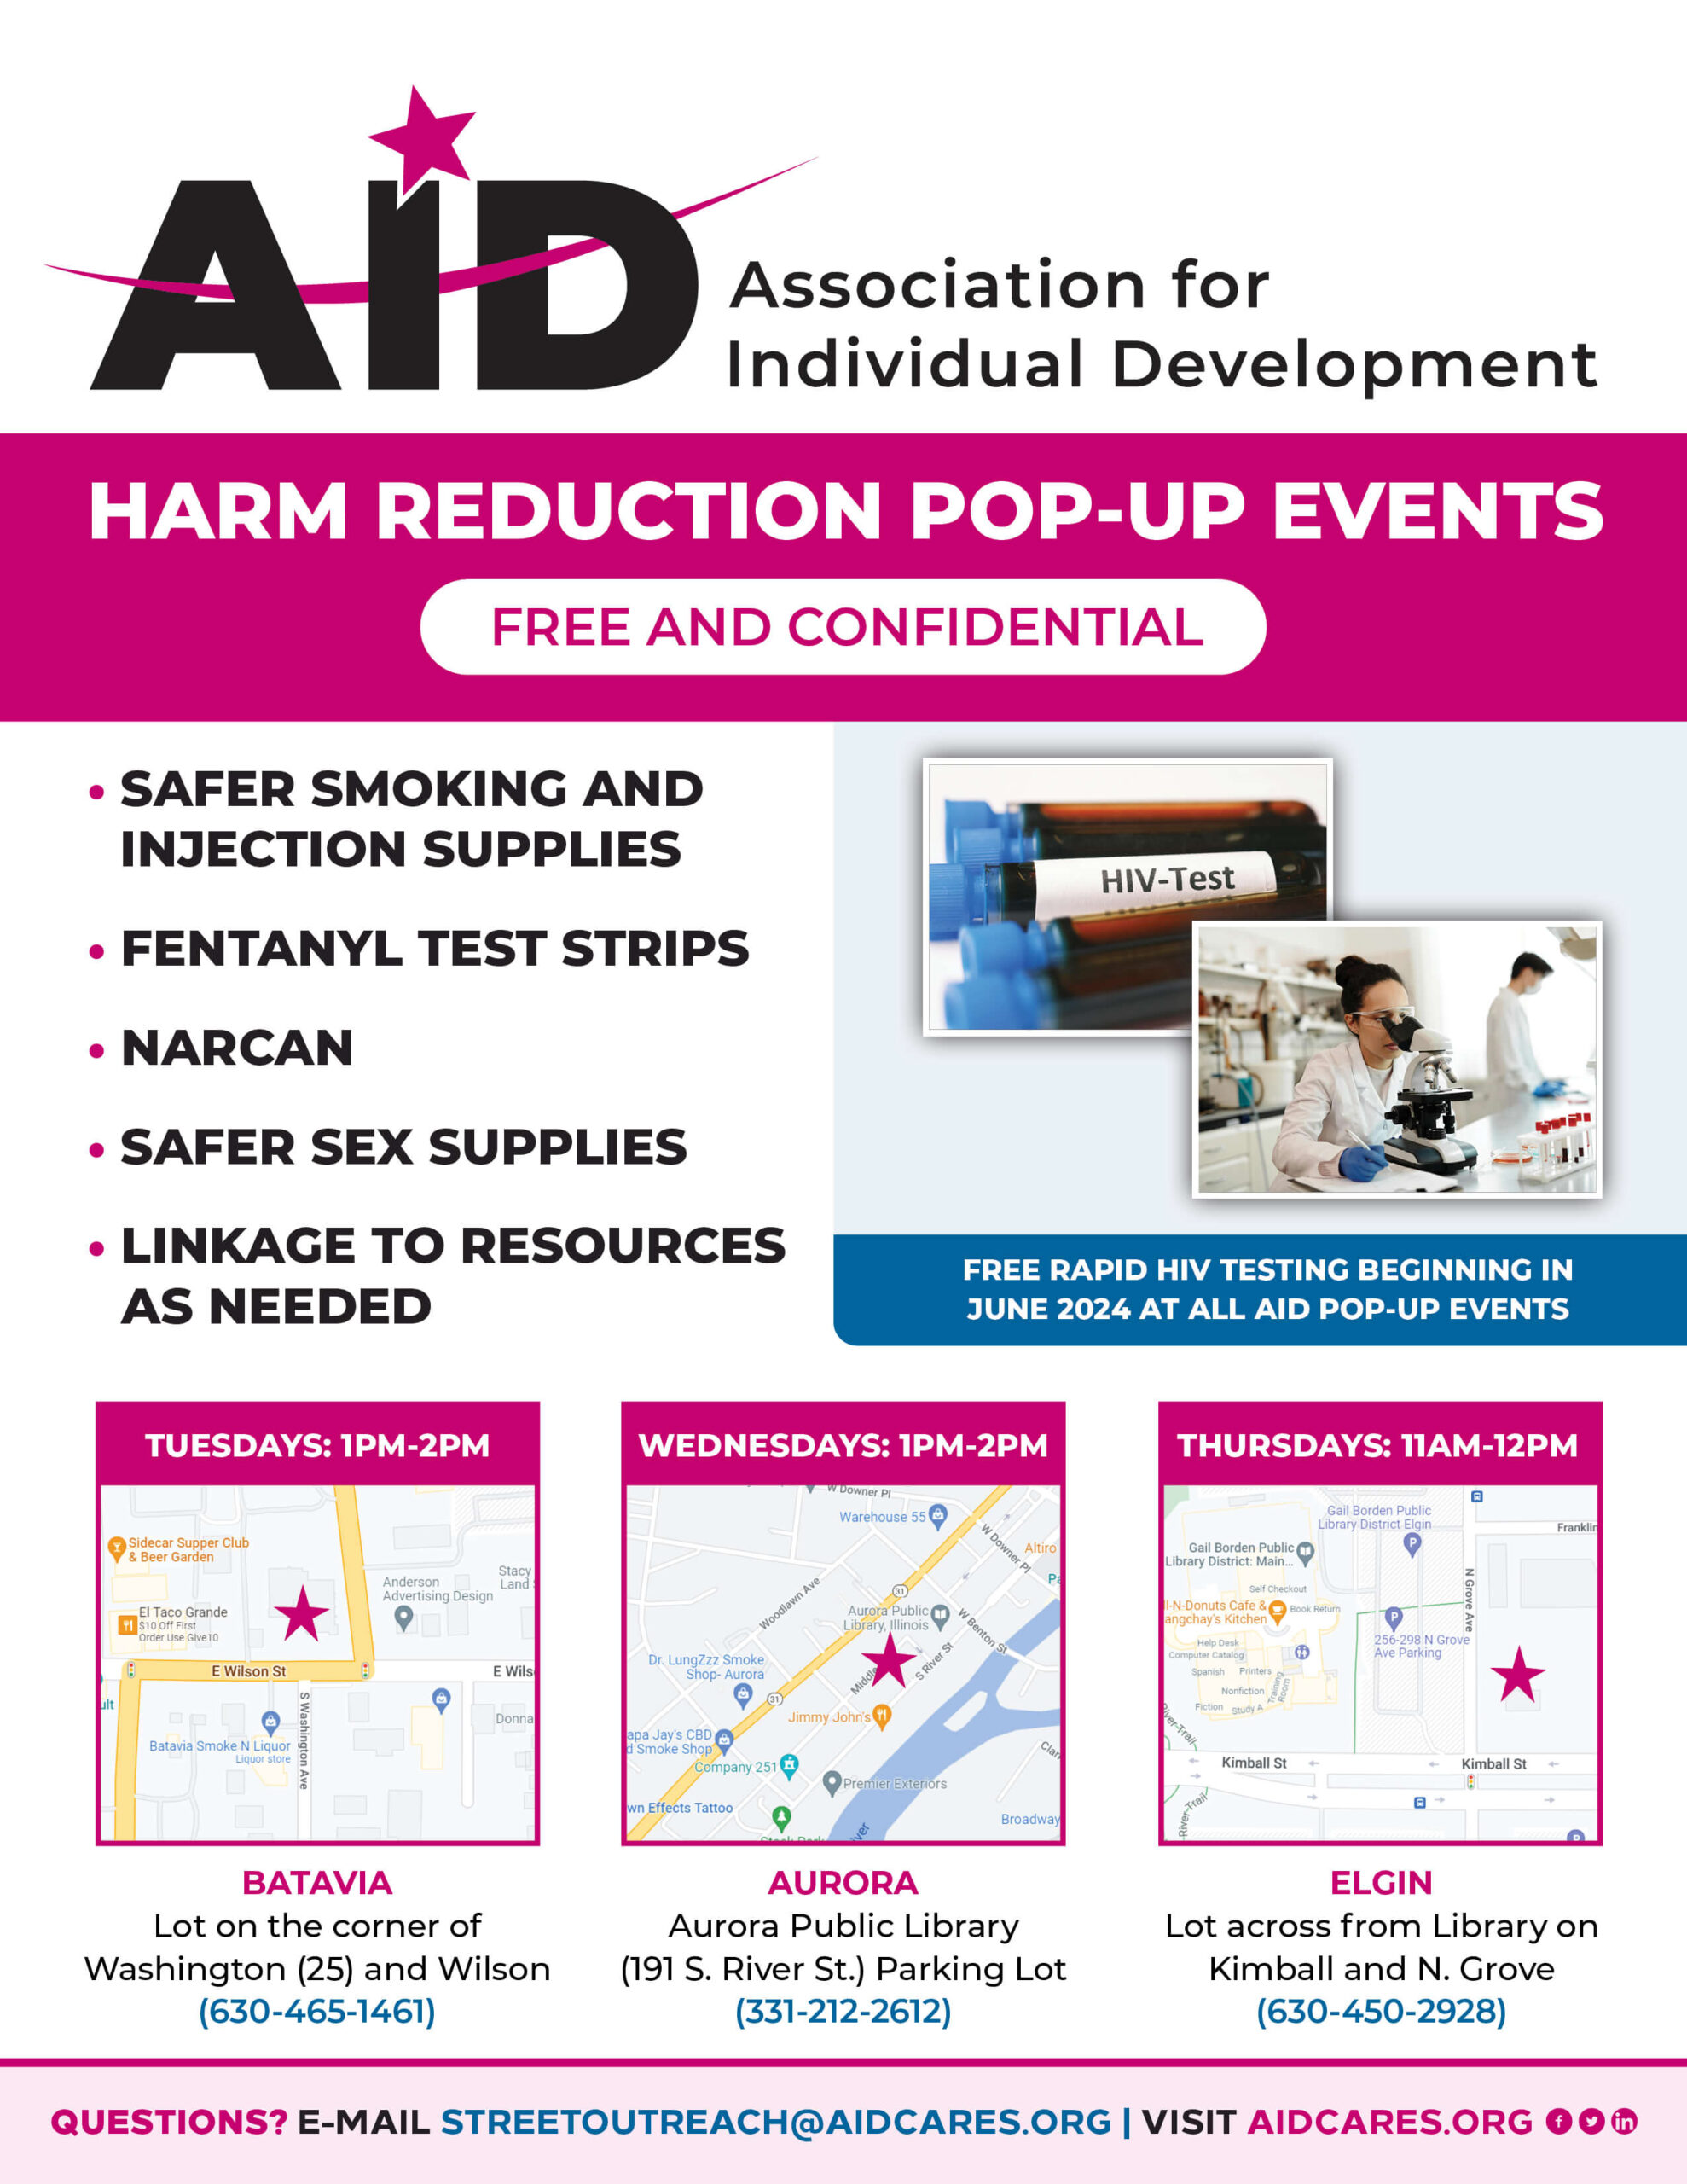 HARM REDUCTION POP-UP EVENTS FREE AND CONFIDENTIAL • SAFER SMOKING AND INJECTION SUPPLIES • FENTANYL TEST STRIPS • NARCAN • SAFER SEX SUPPLIES • LINKAGE TO RESOURCES AS NEEDED BATAVIA Lot on the corner of Washington (25) and Wilson (630-465-1461) QUESTIONS? E-MAIL STREETOUTREACH@AIDCARES.ORG | VISIT AIDCARES.ORG AURORA Aurora Public Library (191 S. River St.) Parking Lot (331-212-2612) TUESDAYS: 1PM-2PM WEDNESDAYS: 1PM-2PM THURSDAYS: 11AM-12PM ELGIN Lot across from Library on Kimball and N. Grove (630-450-2928) FREE RAPID HIV TESTING BEGINNING IN JUNE 2024 AT ALL AID POP-UP EVENTS